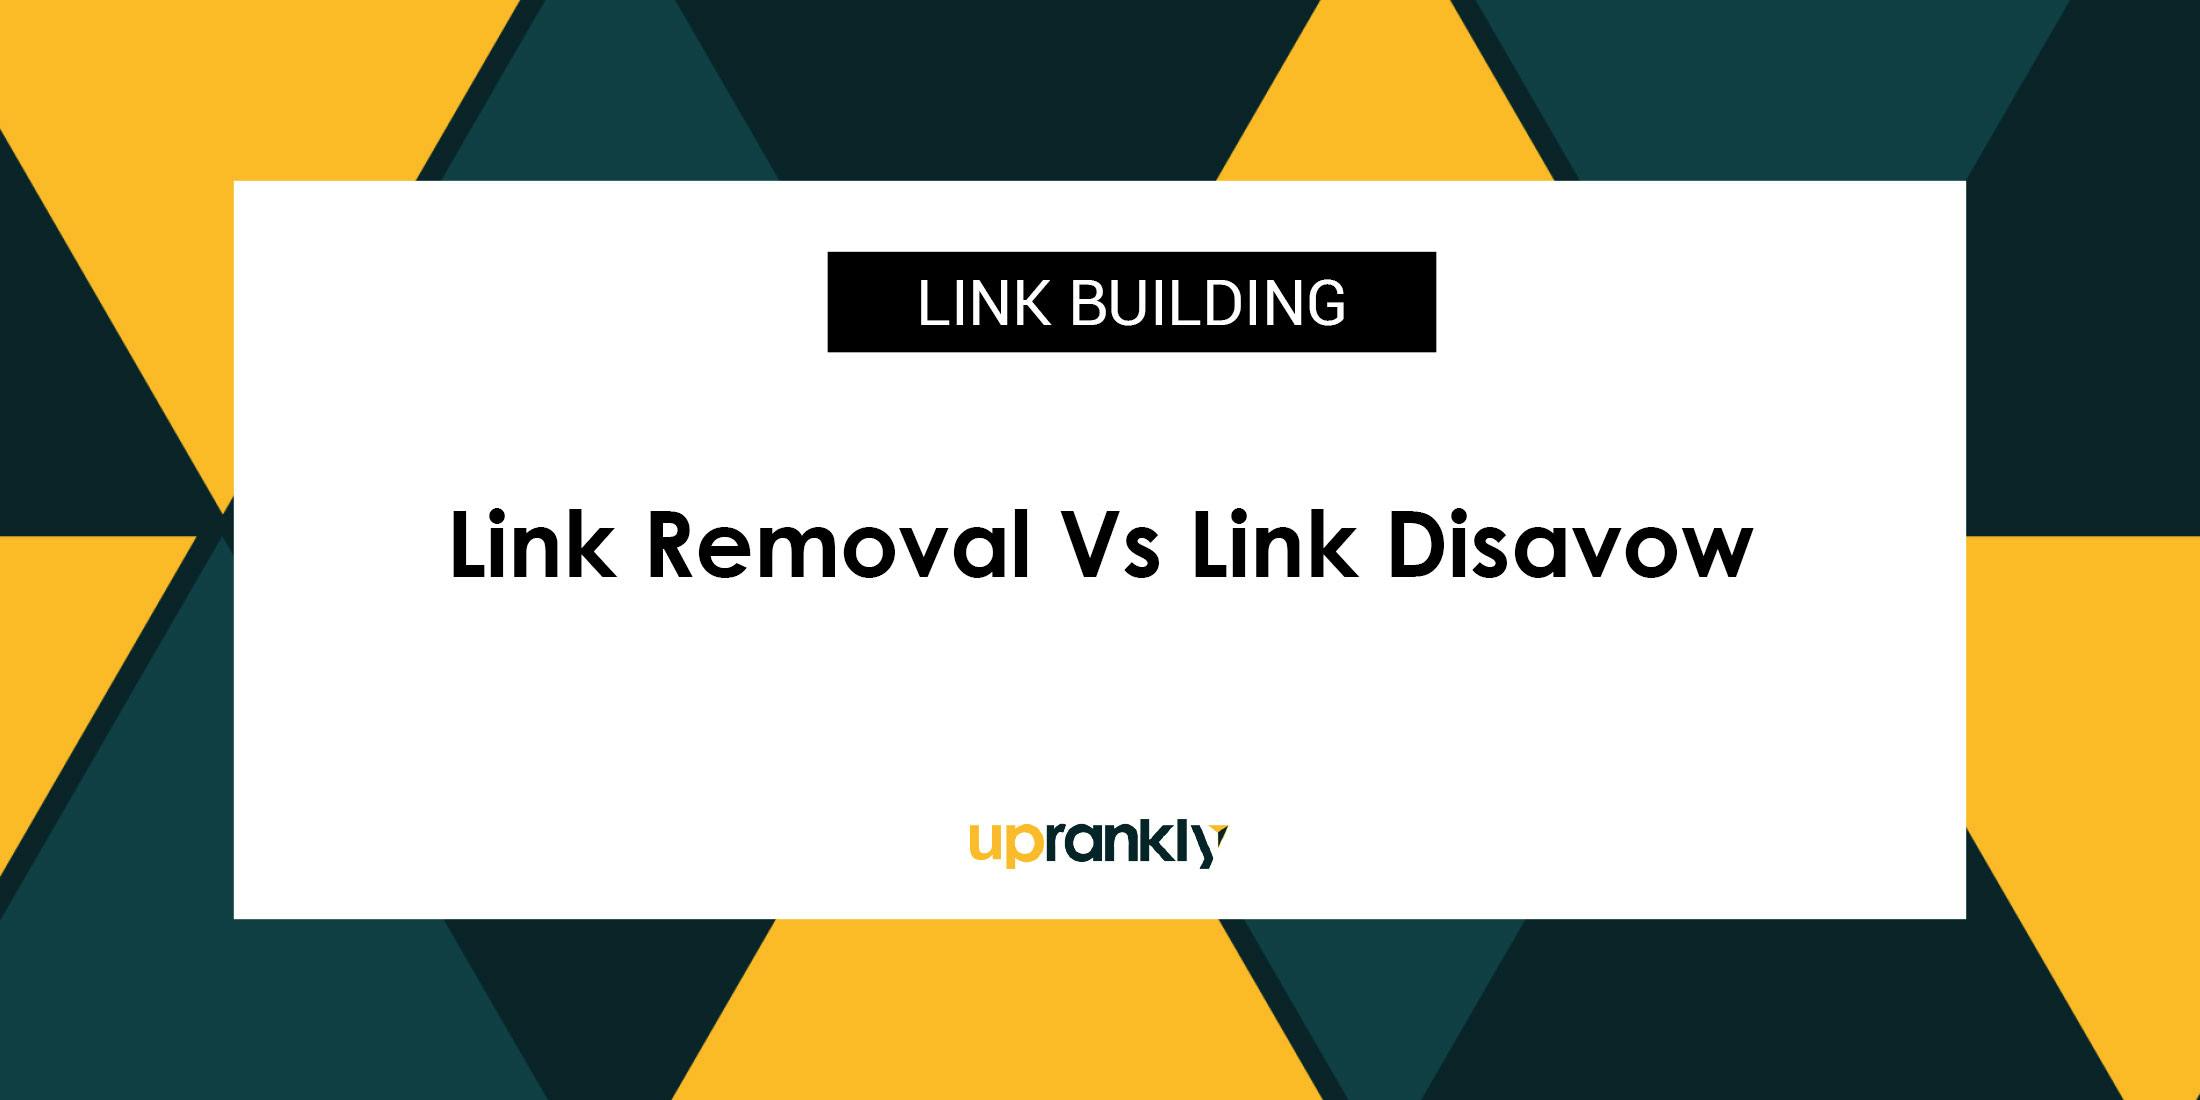 Link Removal Vs Link Disavow: What should you do?